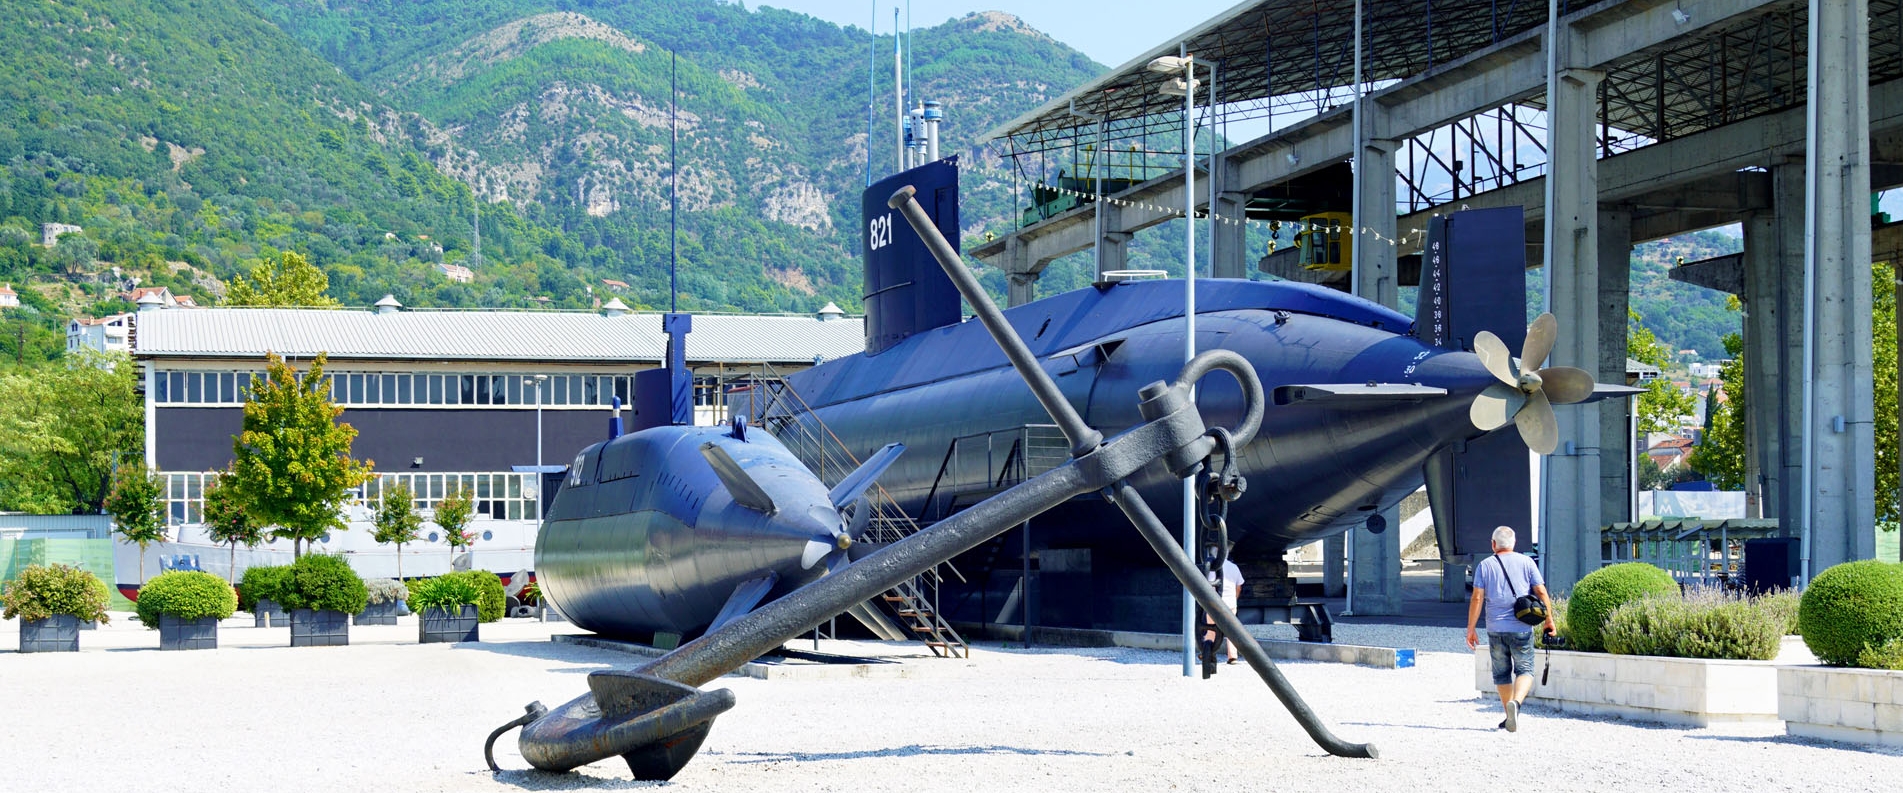 The Maritime Heritage Museum in Tivat 